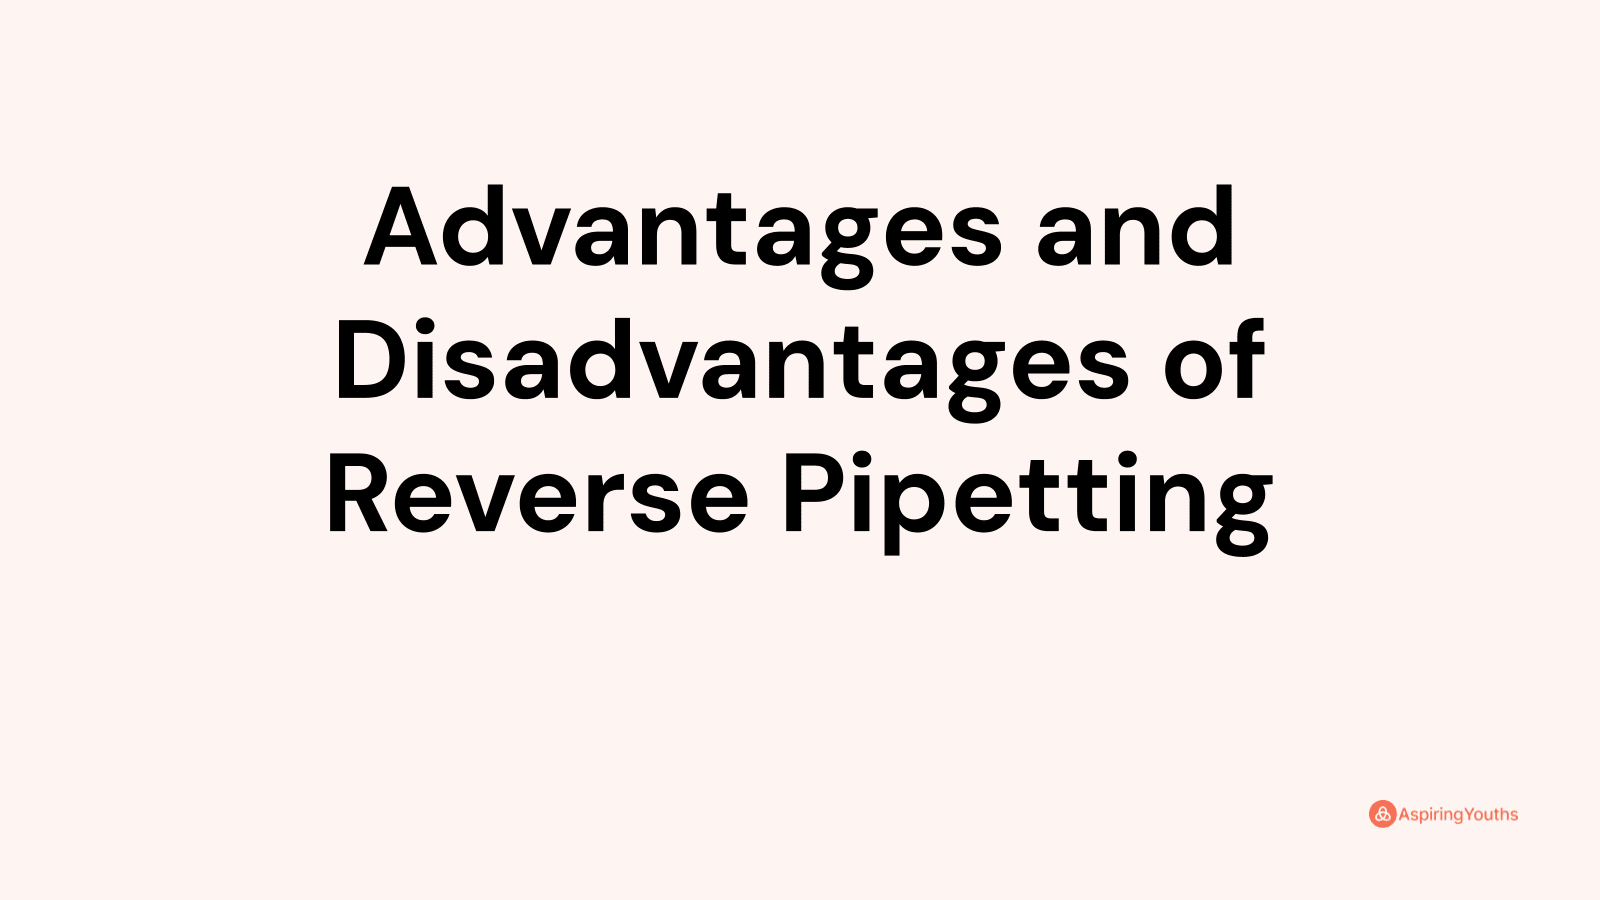 Advantages and disadvantages of Reverse Pipetting